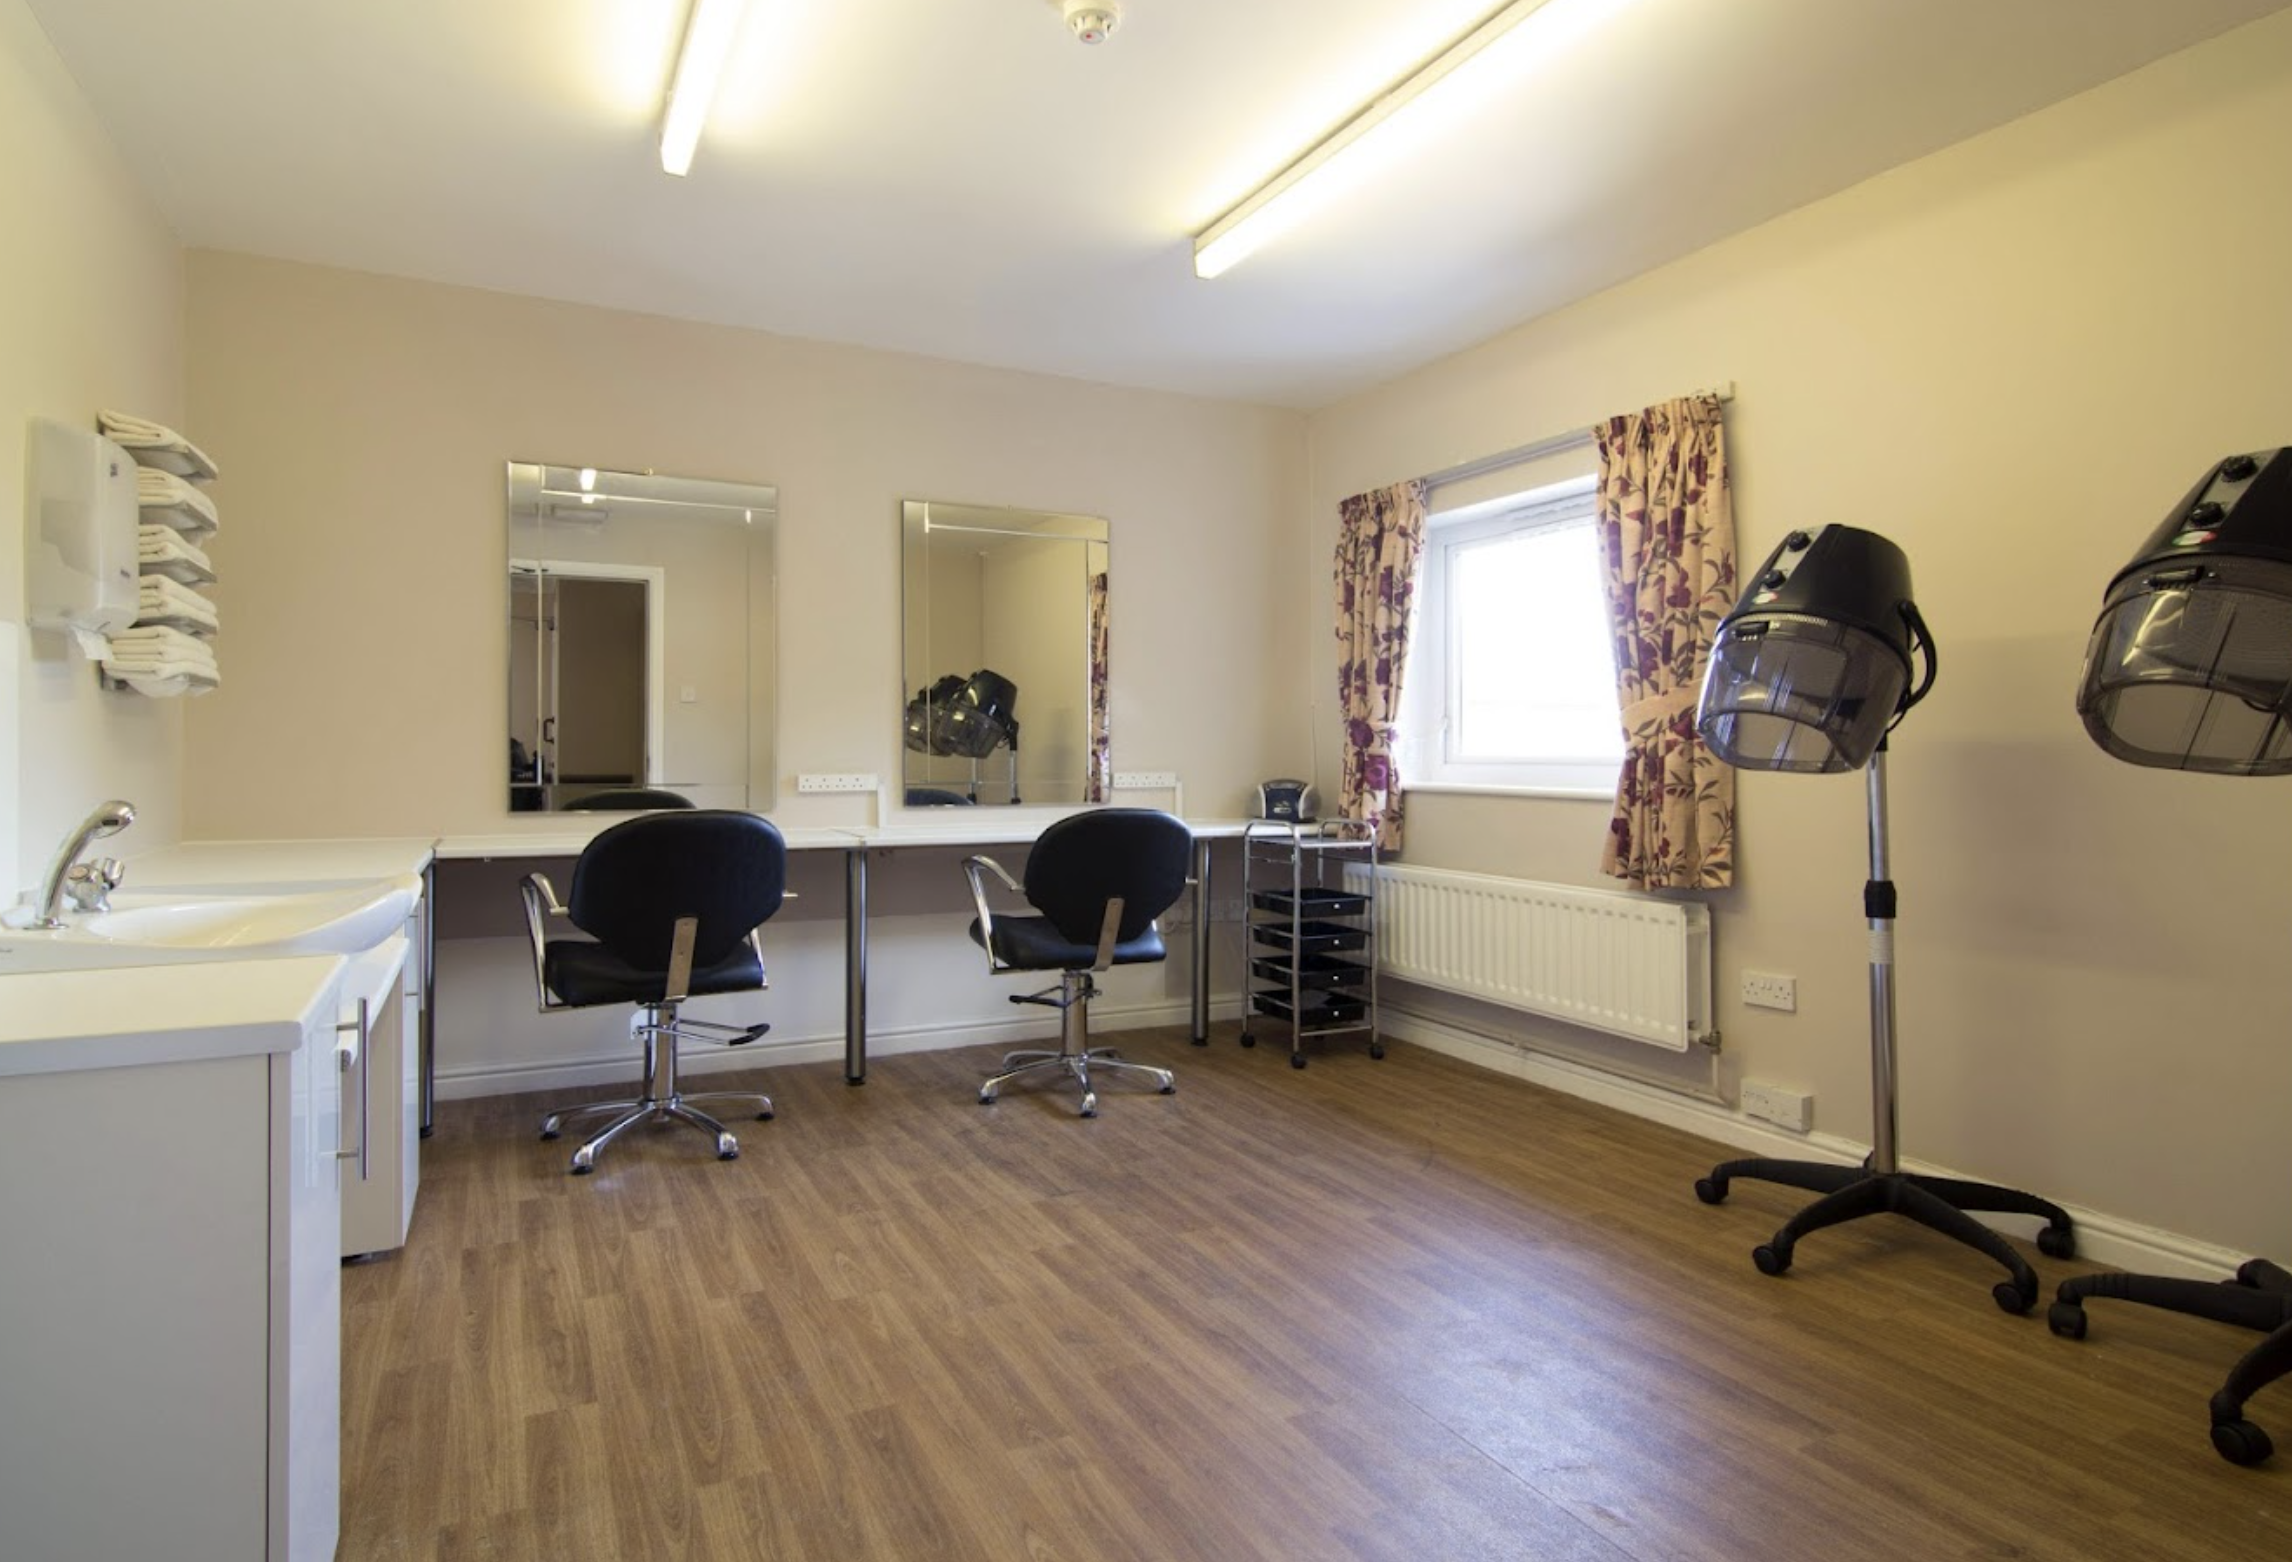 Salon of Abbotsleigh Mews care home in Sidcup, Greater London